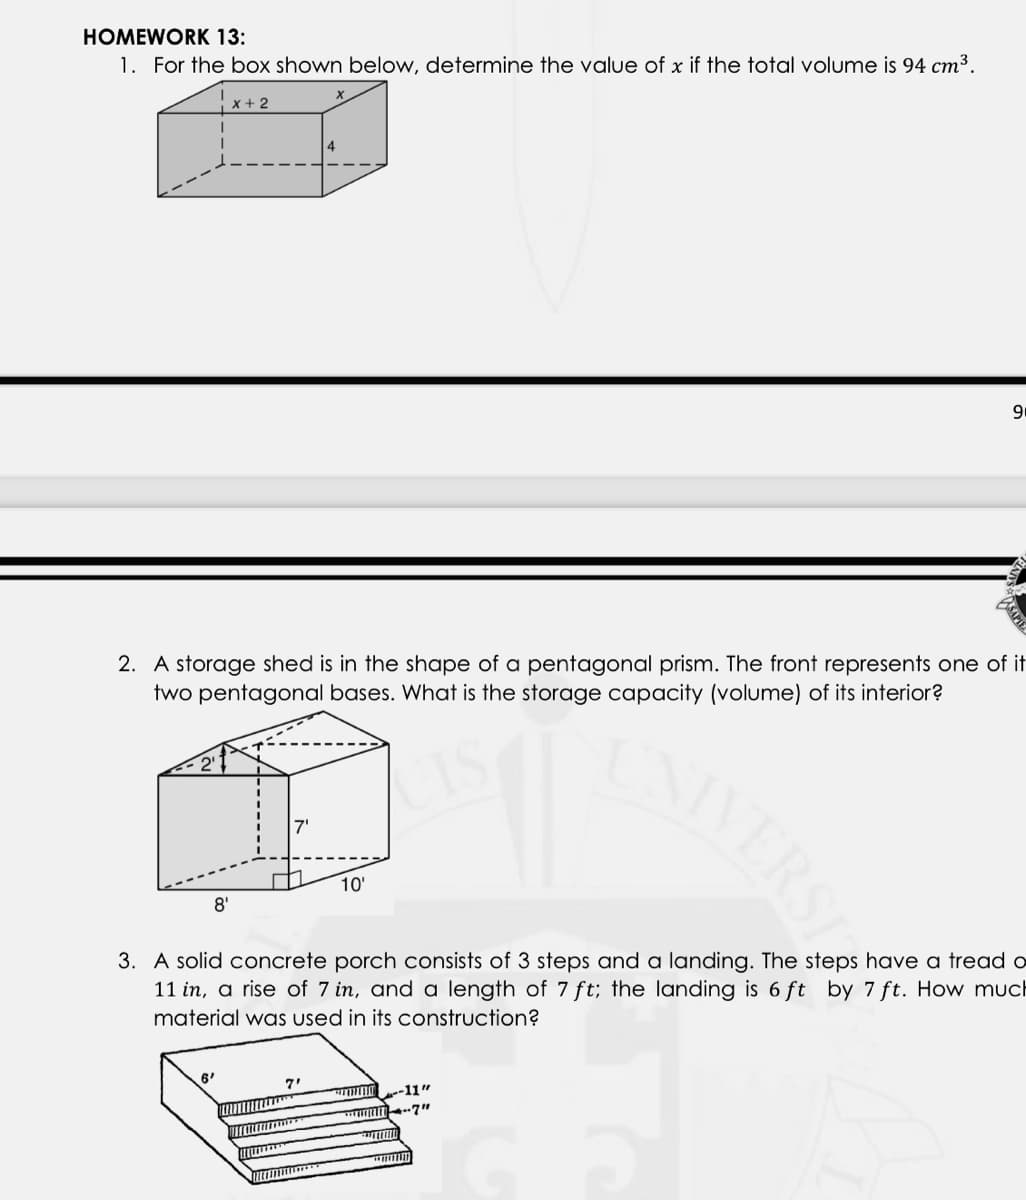 HOMEWORK 13:
1. For the box shown below, determine the value of x if the total volume is 94 cm3.
x + 2
4
2. A storage shed is in the shape of a pentagonal prism. The front represents one of it
two pentagonal bases. What is the storage capacity (volume) of its interior?
VERS
7'
10'
8'
3. A solid concrete porch consists of 3 steps and a landing. The steps have a tread o
11 in, a rise of 7 in, and a length of 7 ft; the landing is 6 ft by 7 ft. How much
material was used in its construction?
6'
7"
